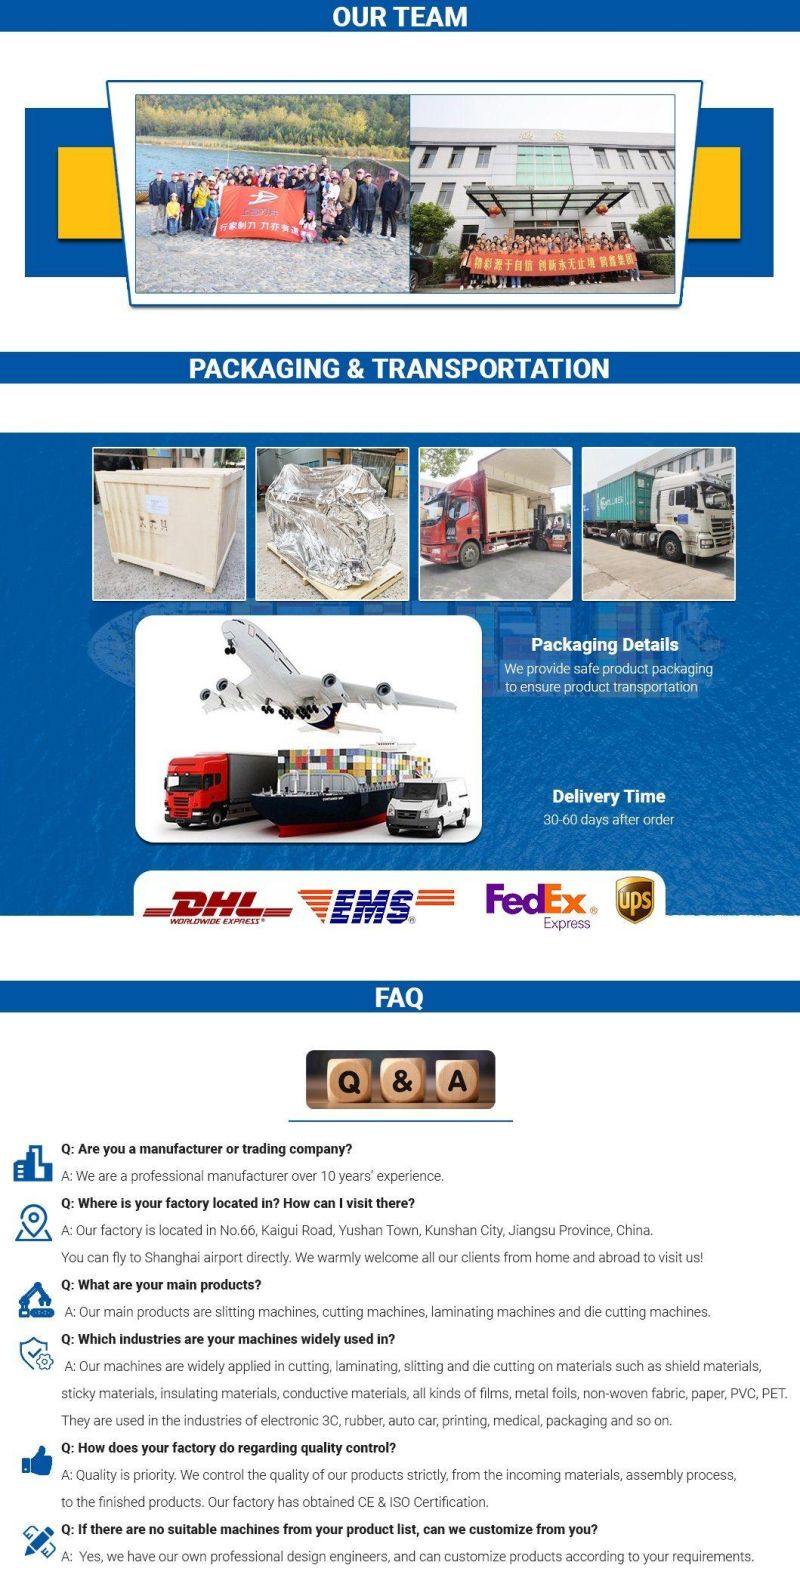 450mm/450mm Insulating Materials Flatbed Manual Cutting Die Cut Machine with Factory Price